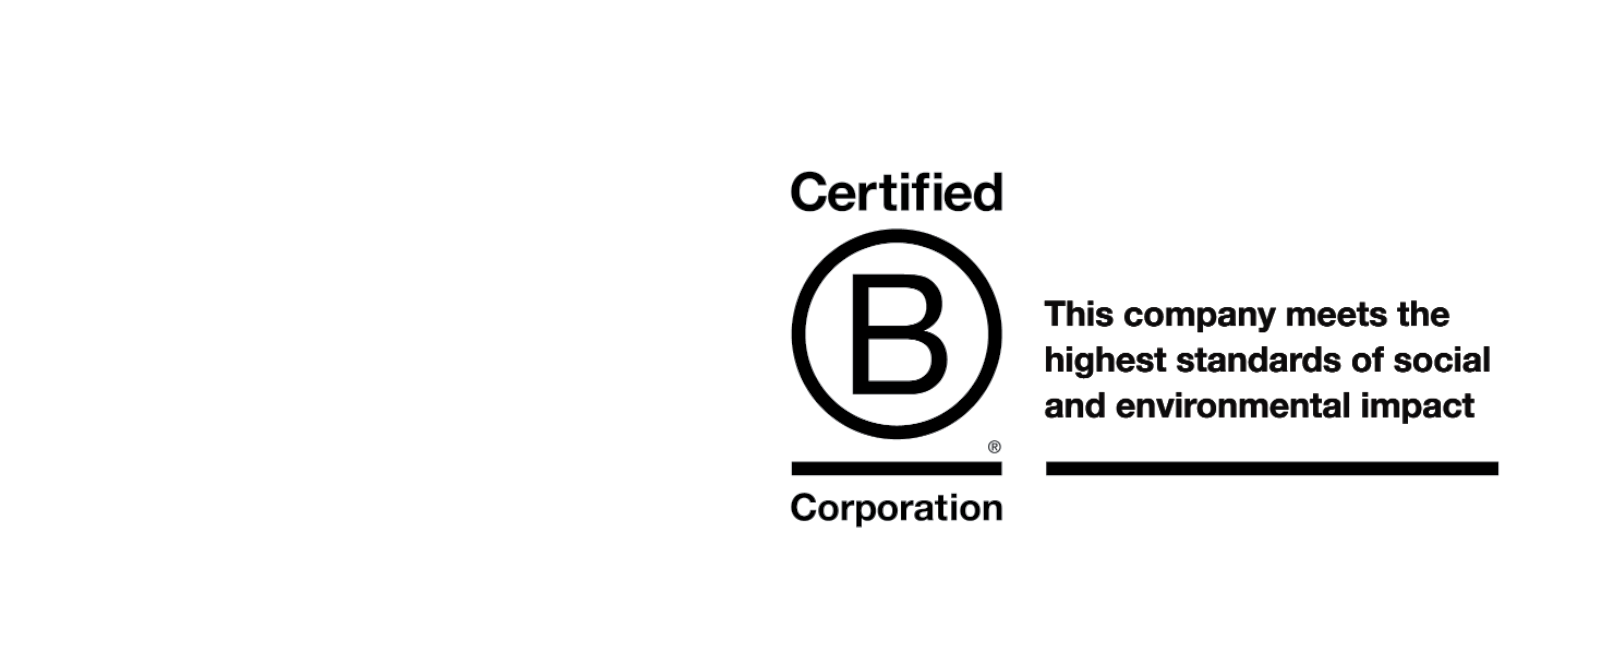 Whizz Education Limited Certifies as a B Corporation